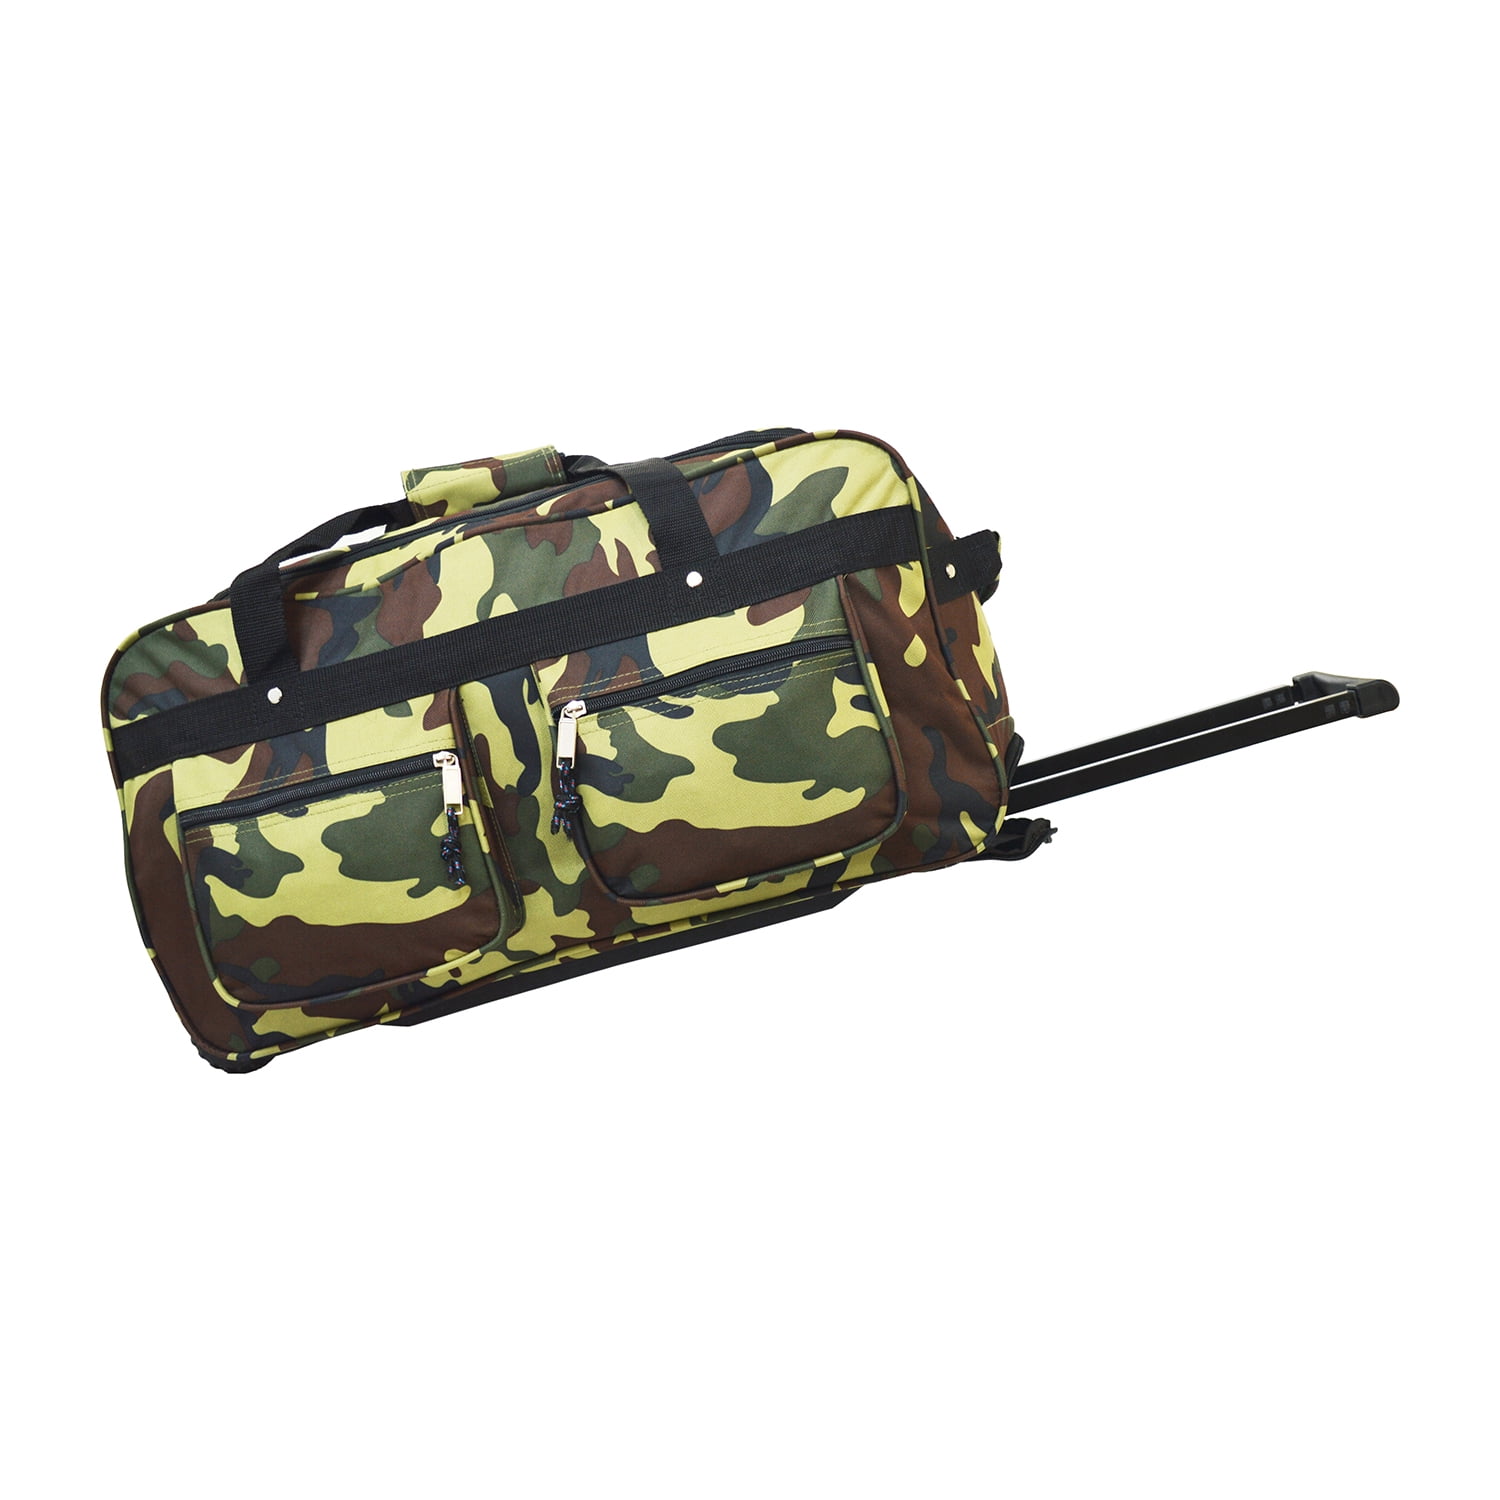 Every Day Carry Large Capacity Heavy Duty Rolling Duffel Bag - 0